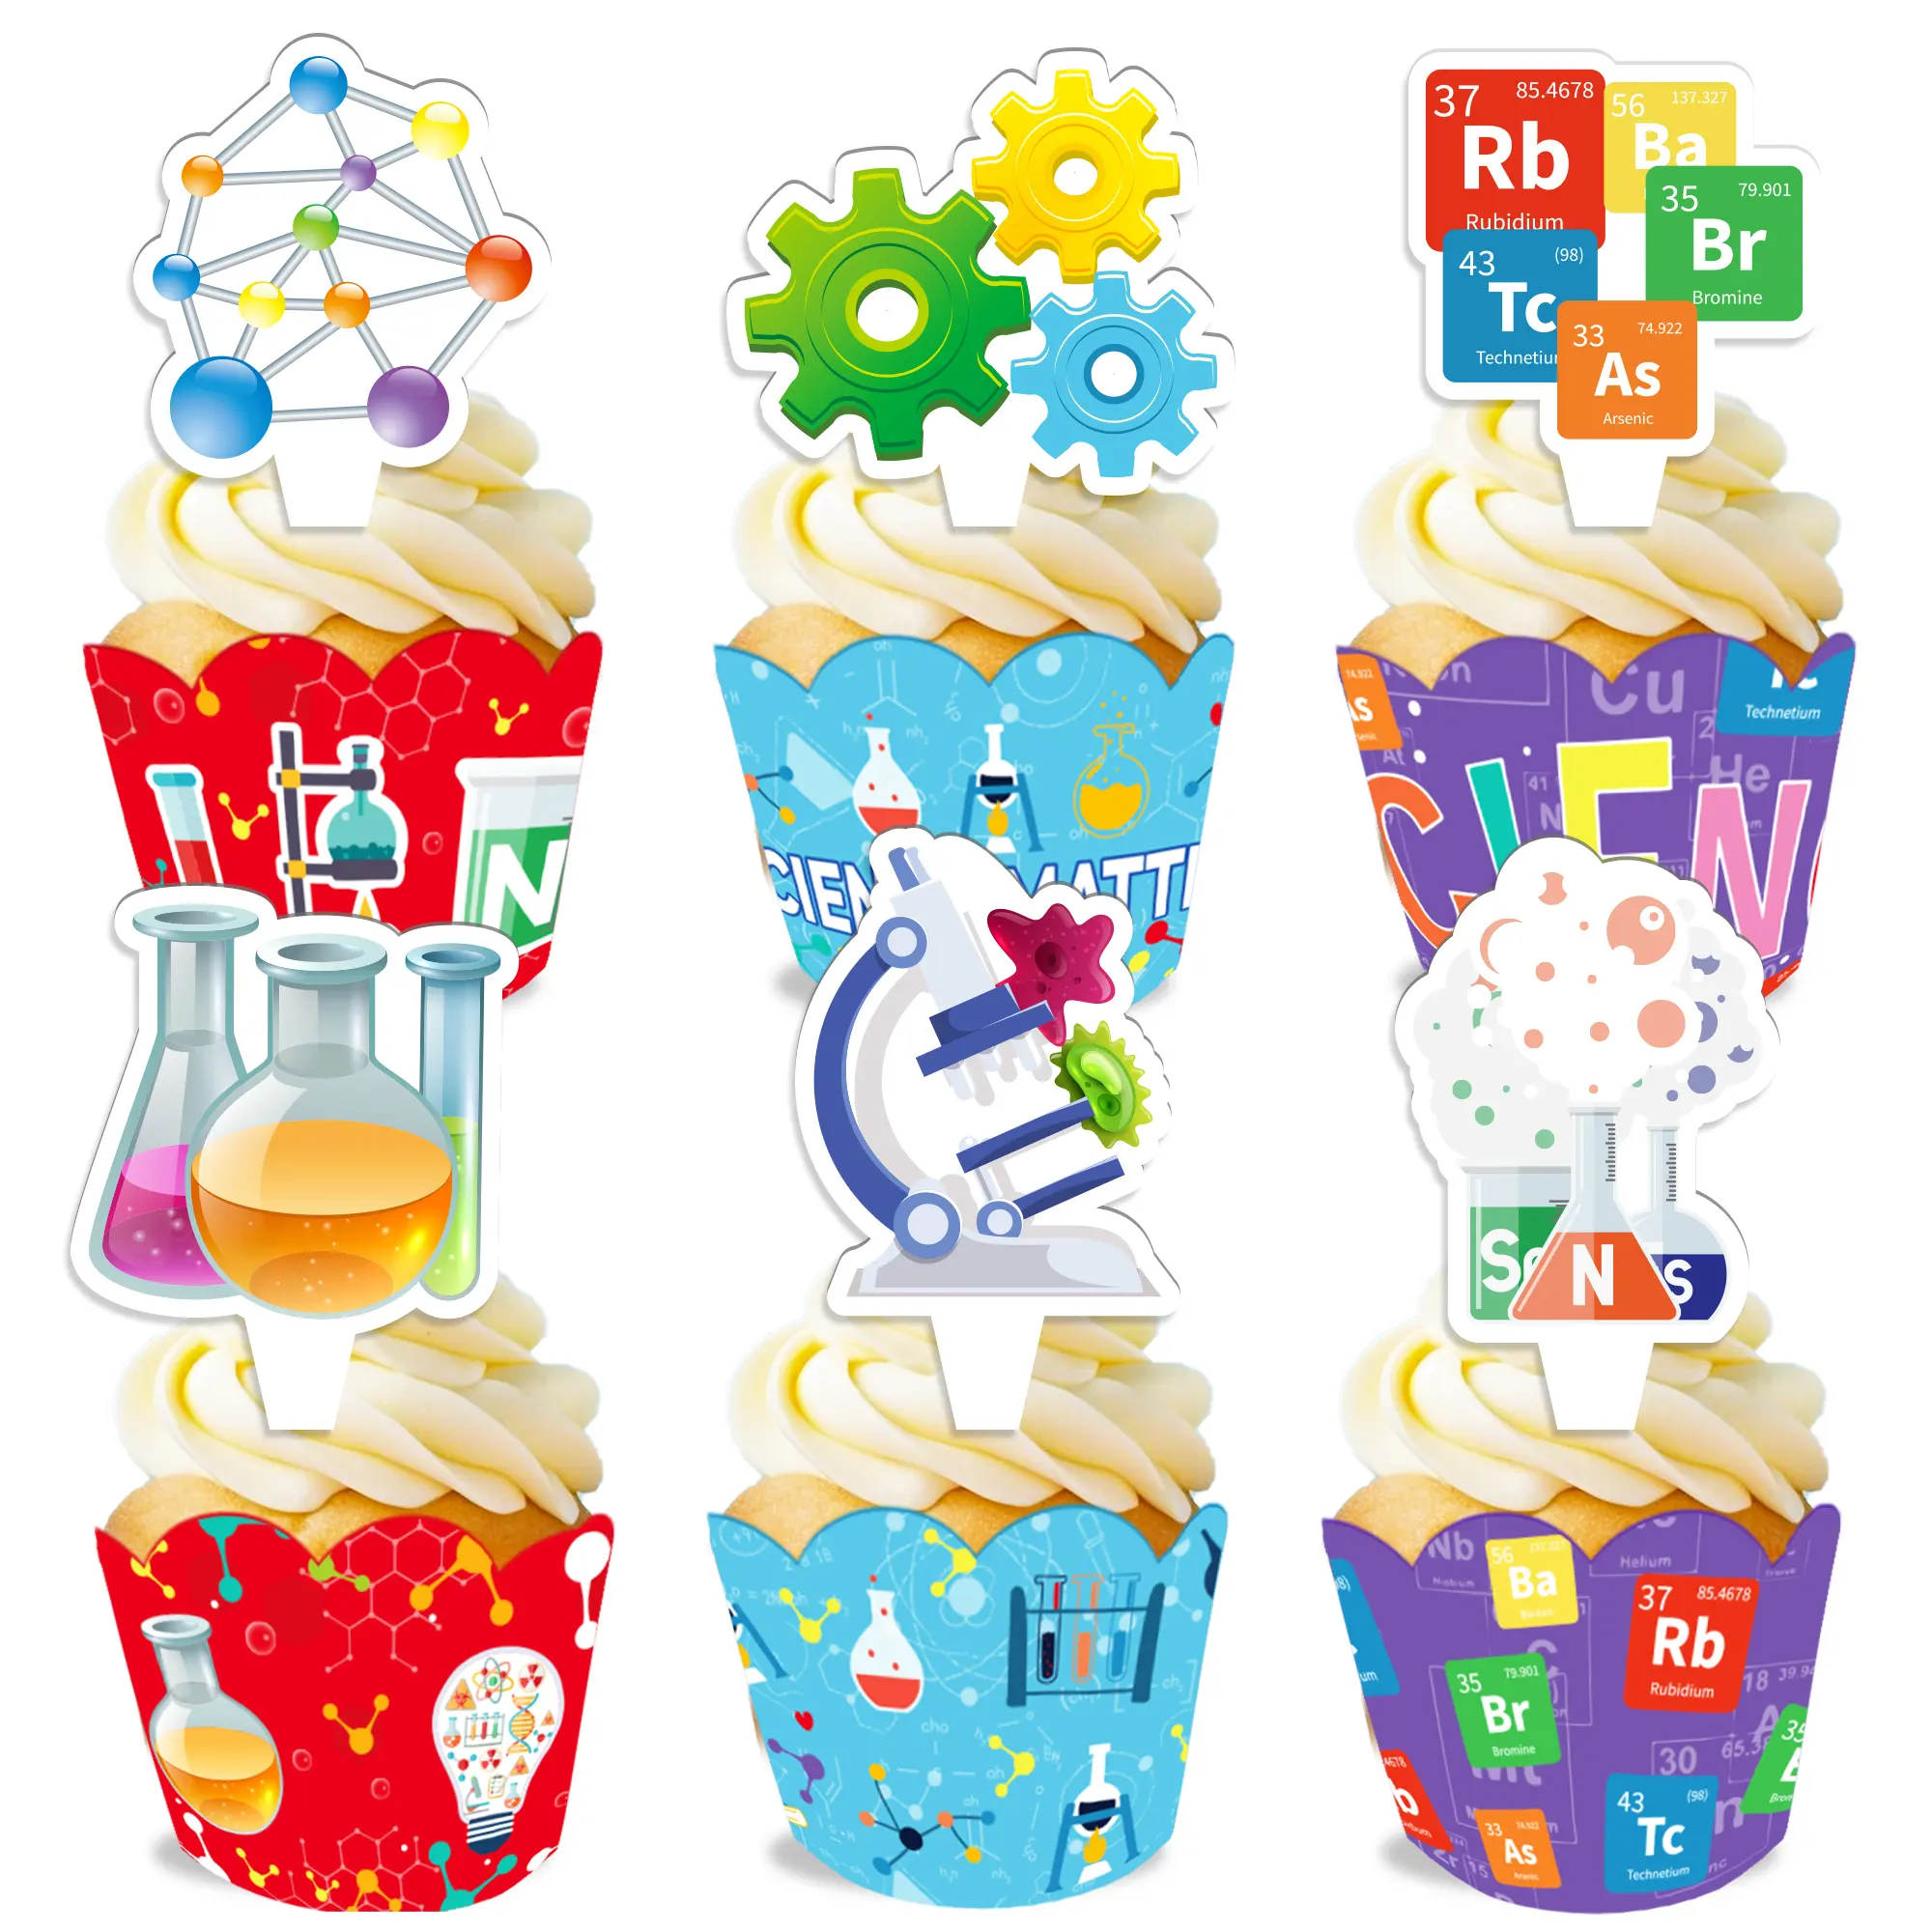 WB088 Science Themed Paper Cupcake Toppers & Wrappers for Kids Boys Science Birthday Party Decorations Cake Decorating Supplies